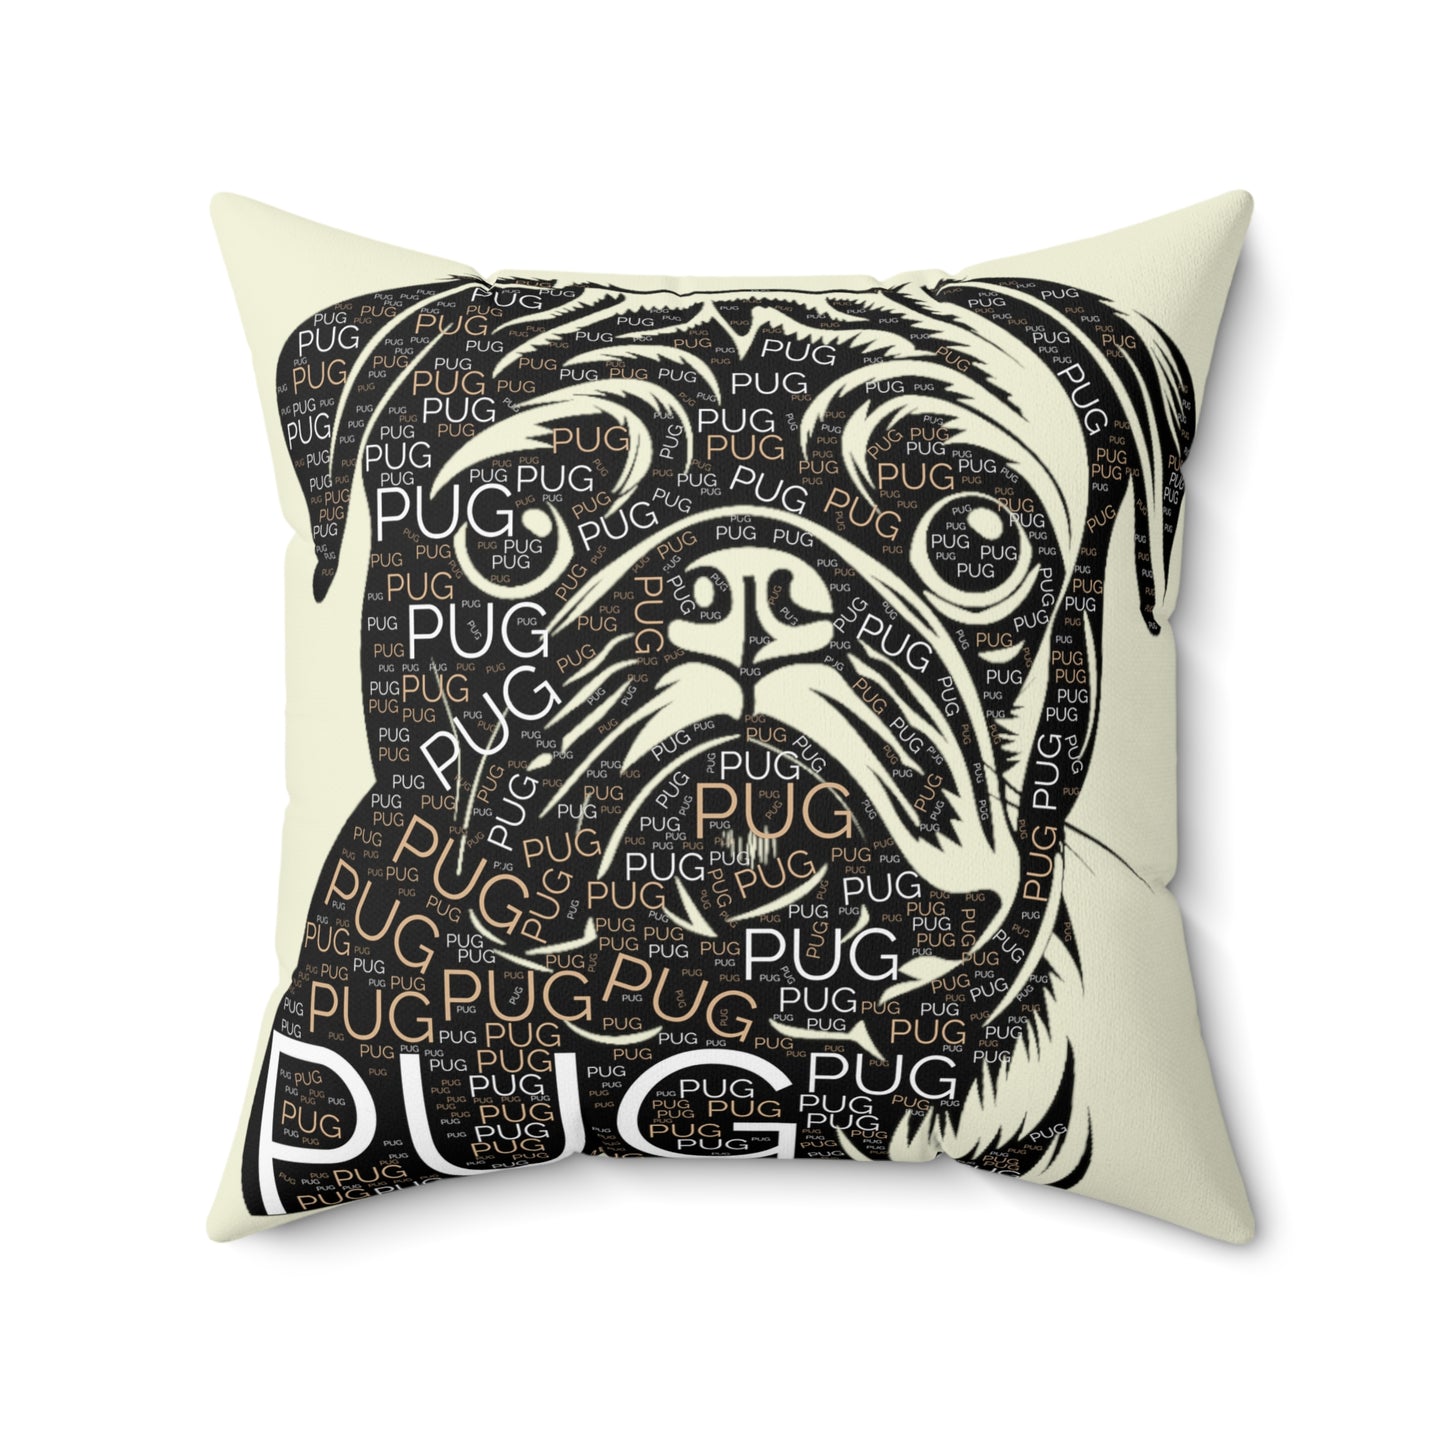 Pug-ly Square Throw Pillow with Removeable Cover